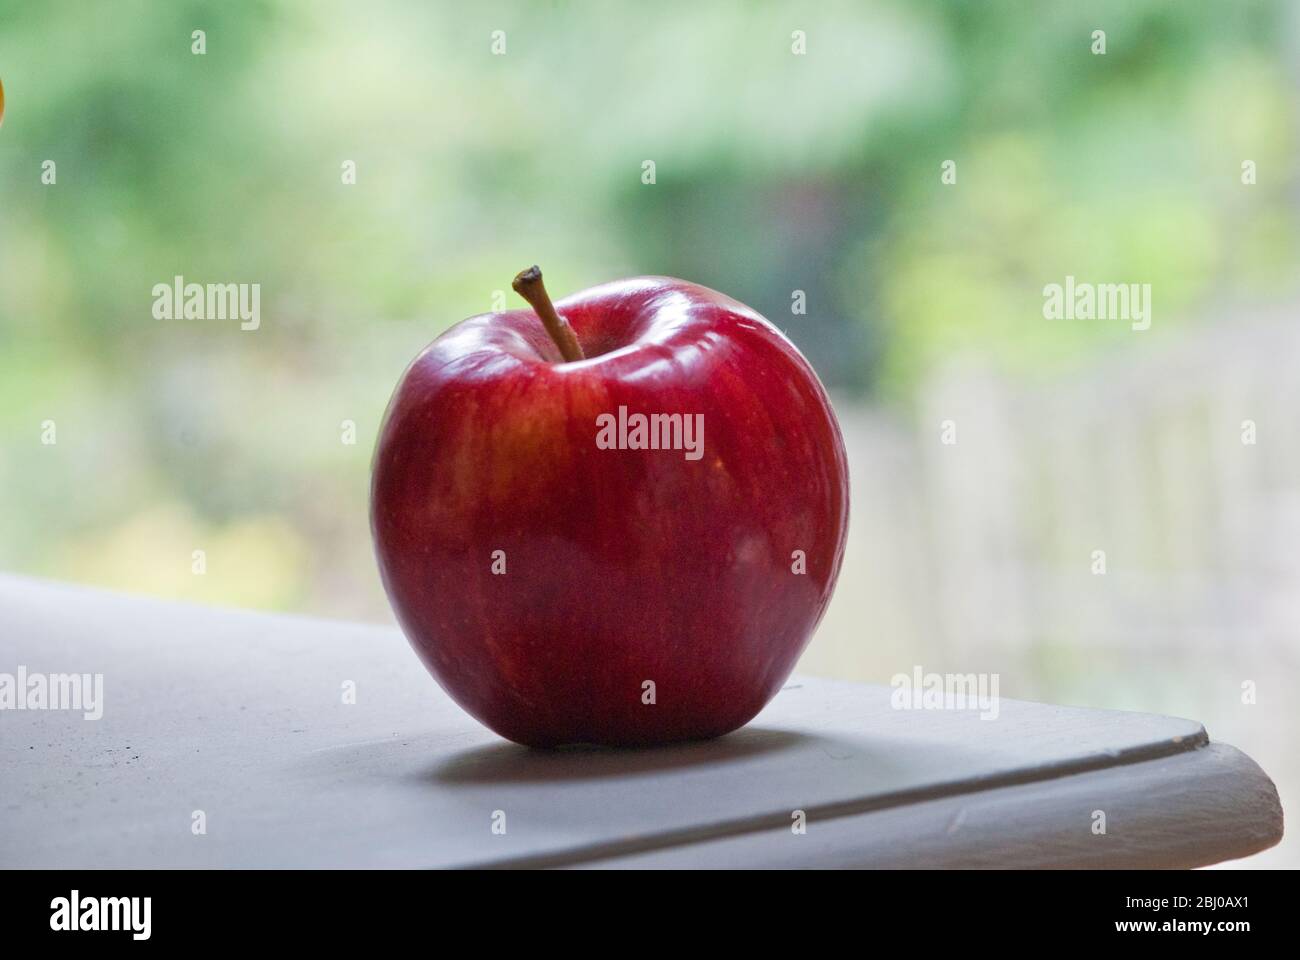 One whole red apple in natural setting - Stock Photo